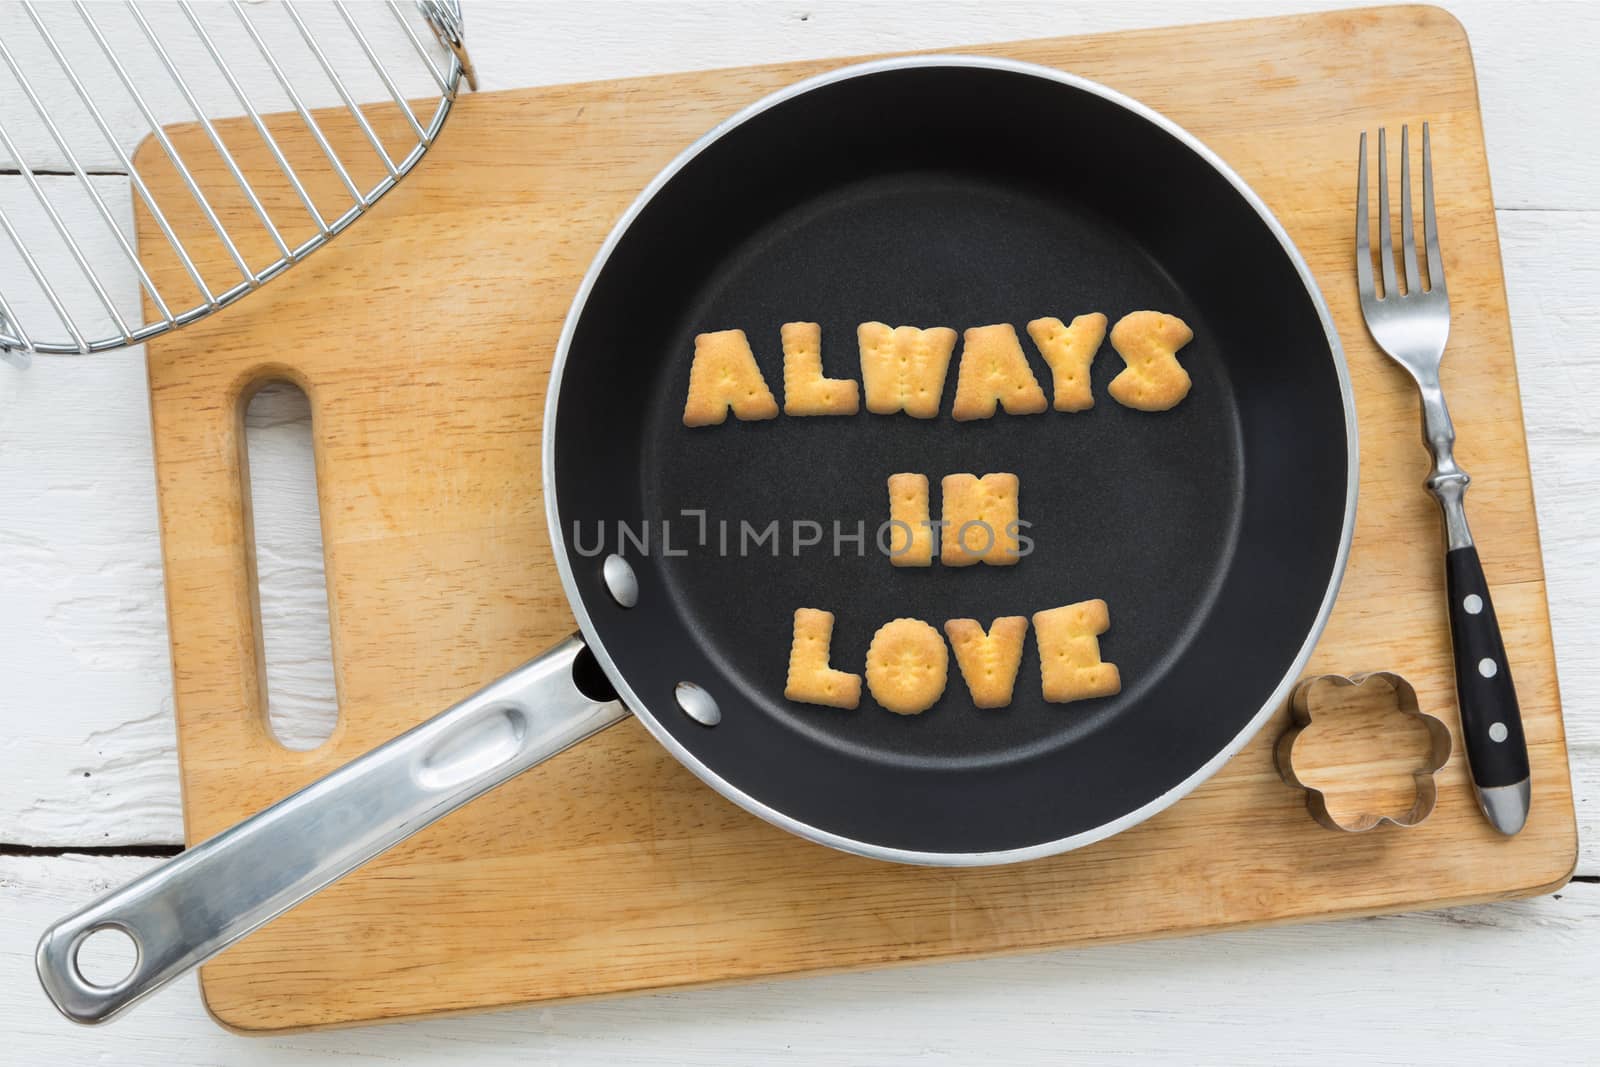 Top view of alphabet text collage made of cookies biscuits. Quote ALWAYS IN LOVE putting in frying pan. Other utensils: fork, cookie cutter and cutting board putting on white wooden table, vintage style image.